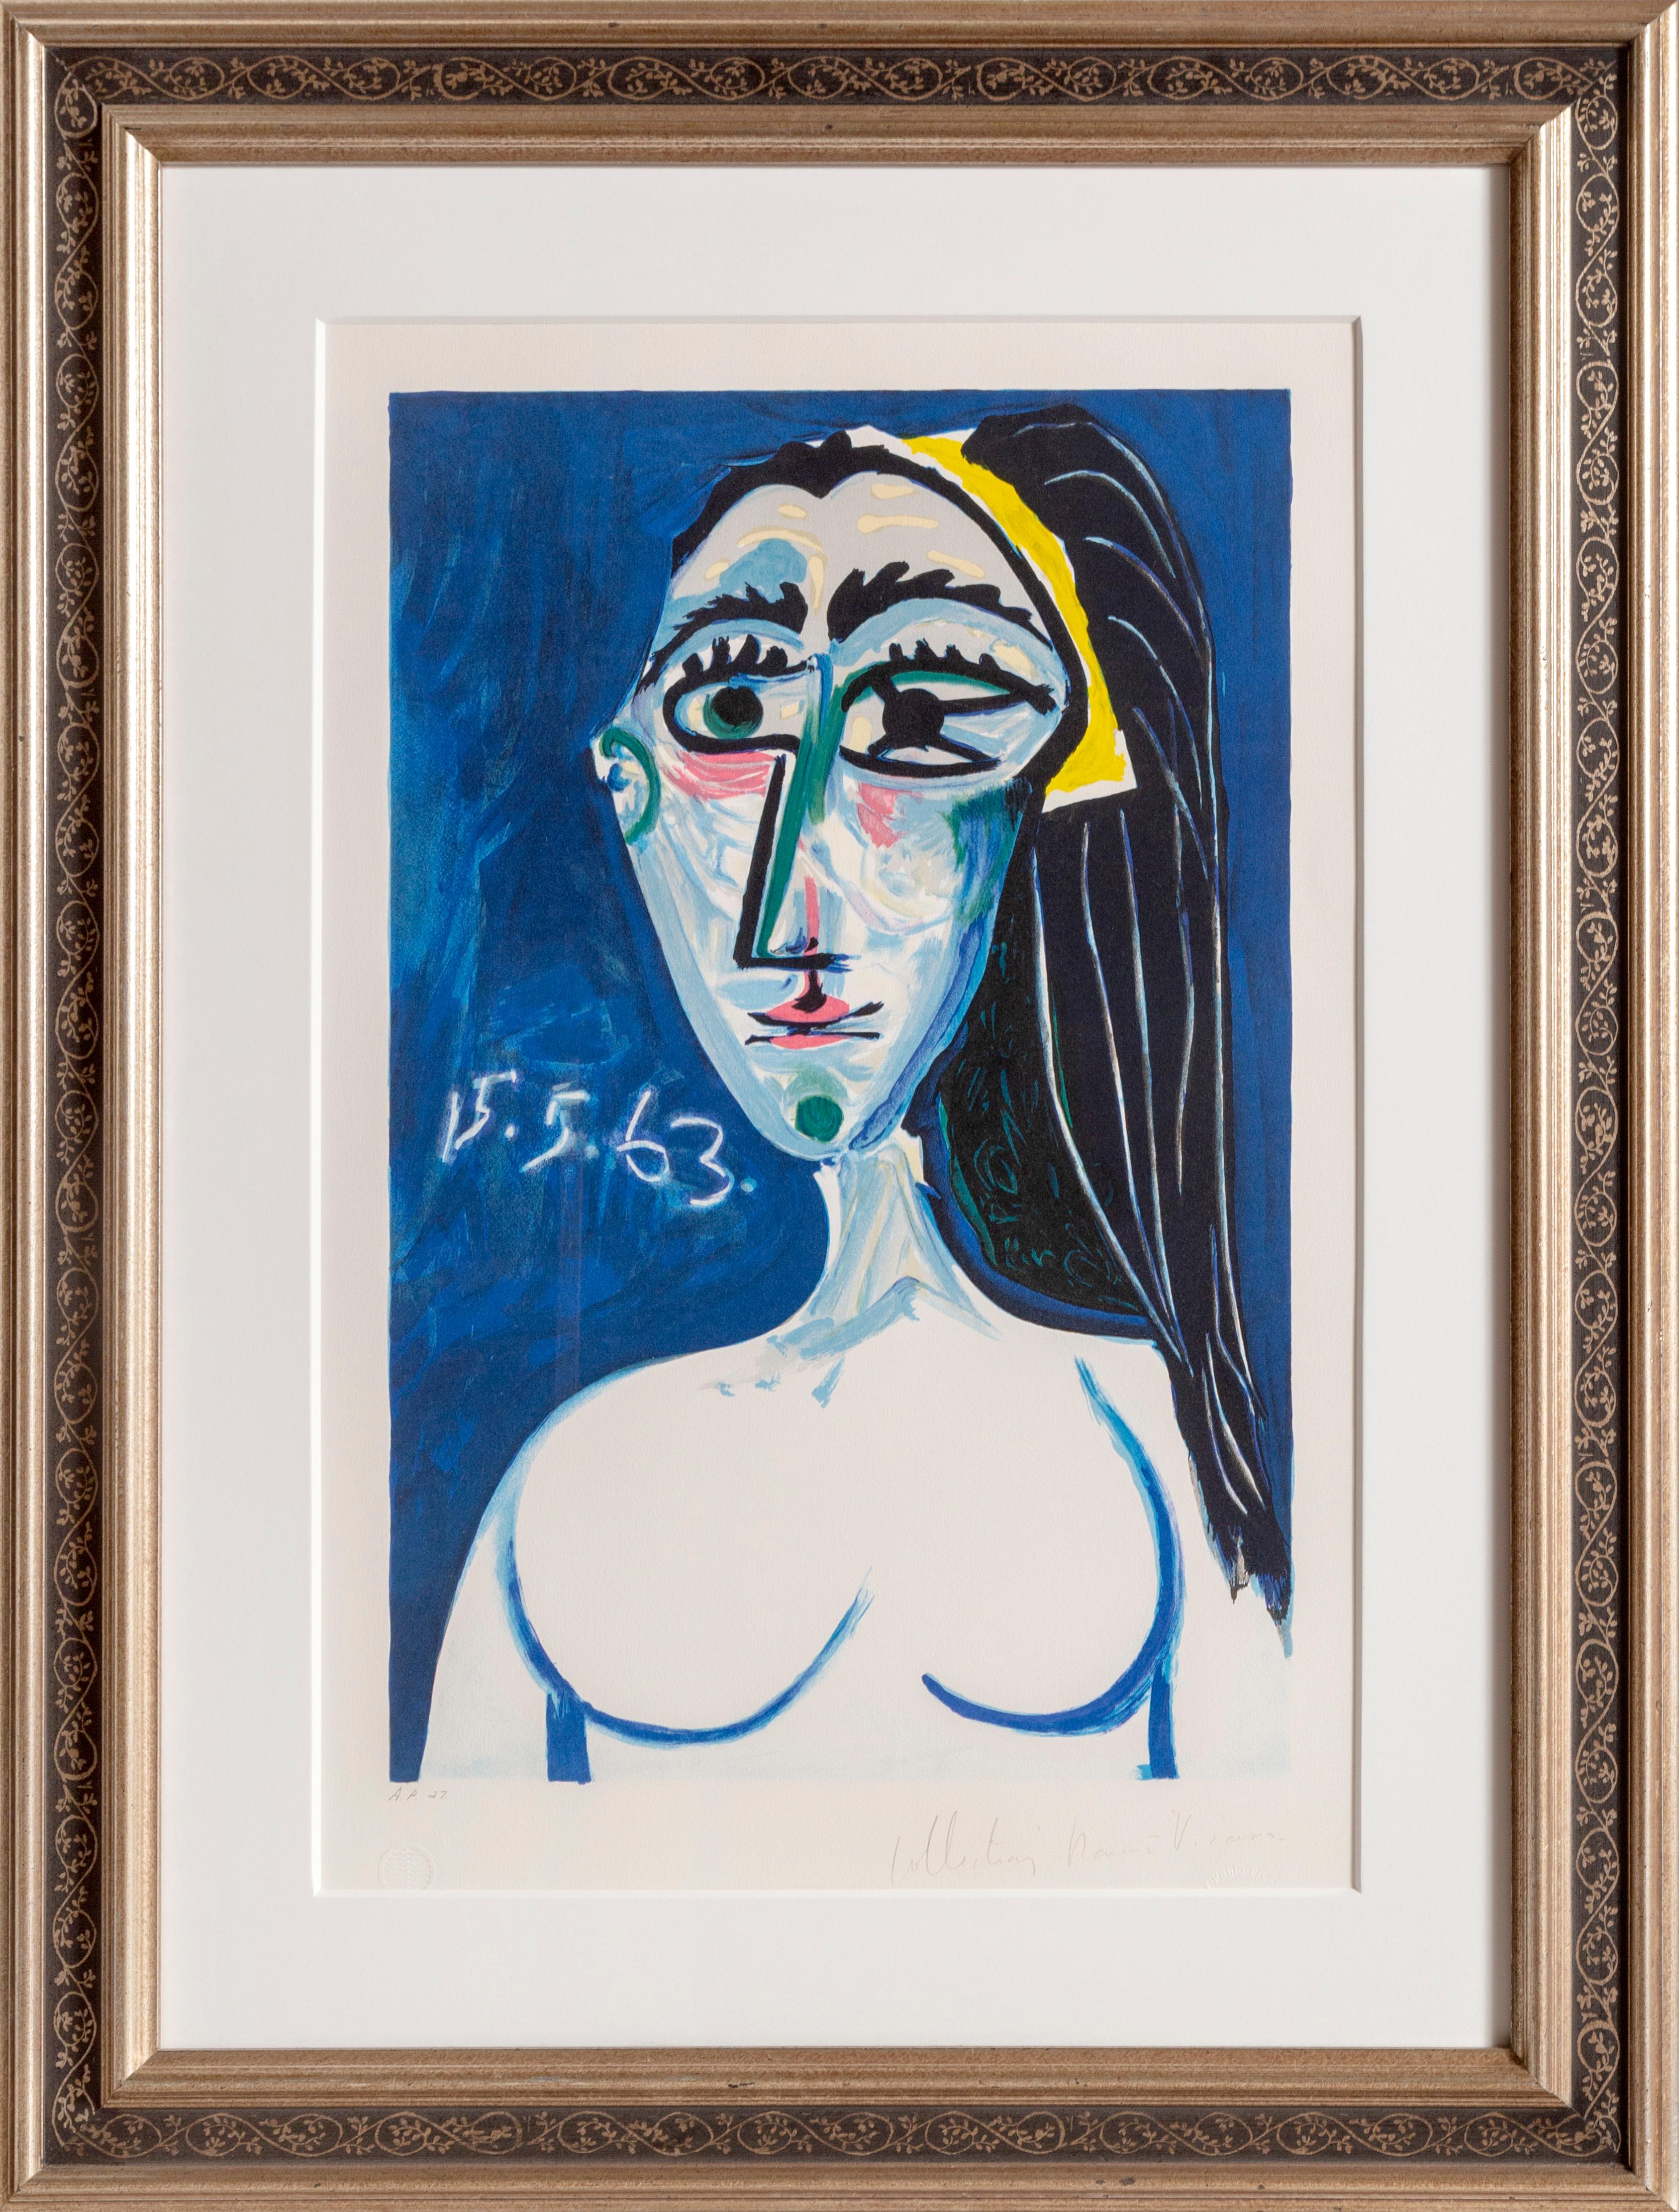 A lithograph from the Marina Picasso Estate Collection after the Pablo Picasso painting "Buste de Femme Nue Face (Jacqueline Roque)". The original painting was completed in 1963. In the 1970's after Picasso's death, Marina Picasso, his